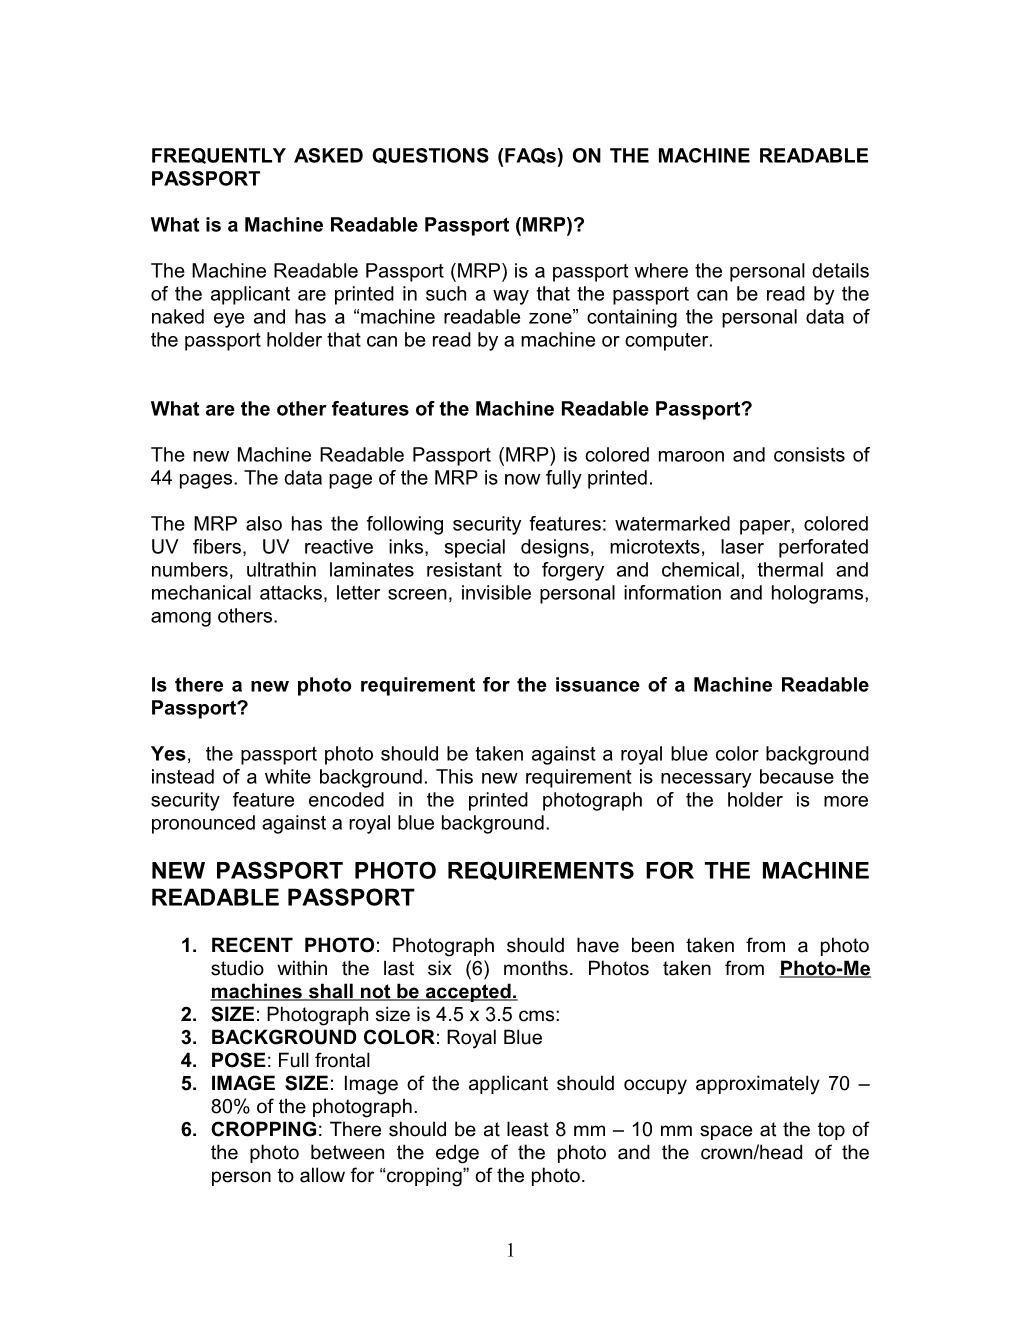 New Procedure to Apply for Machine-Readable Passport (MRP) Effective 04 February 2008